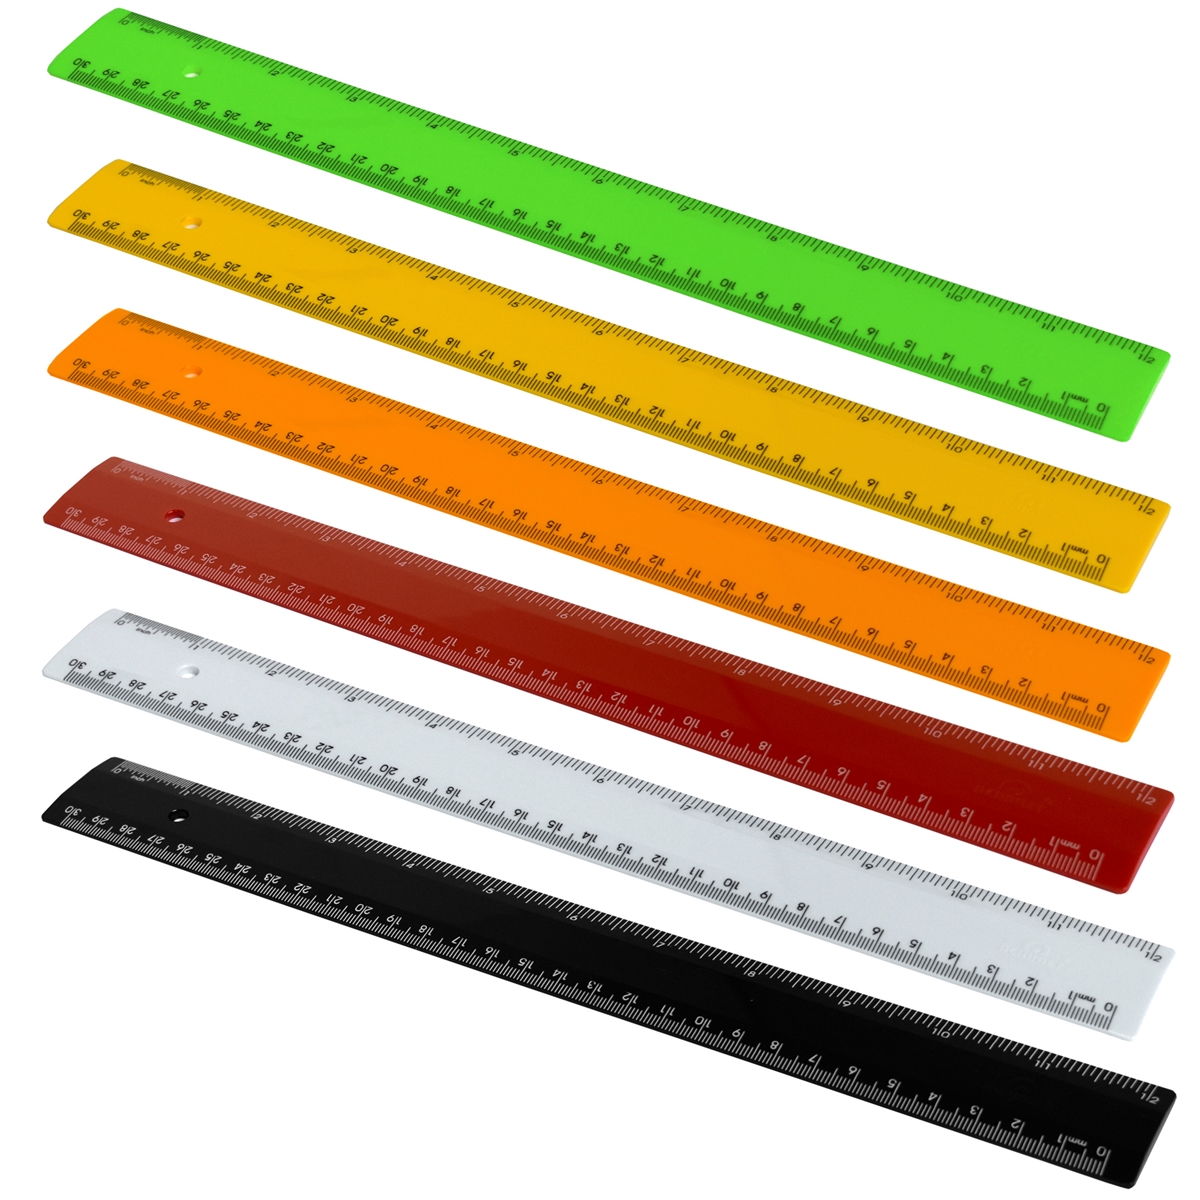 Acrimet Plastic Ruler 12 Inches and 30 cm Heavy Duty (Citric